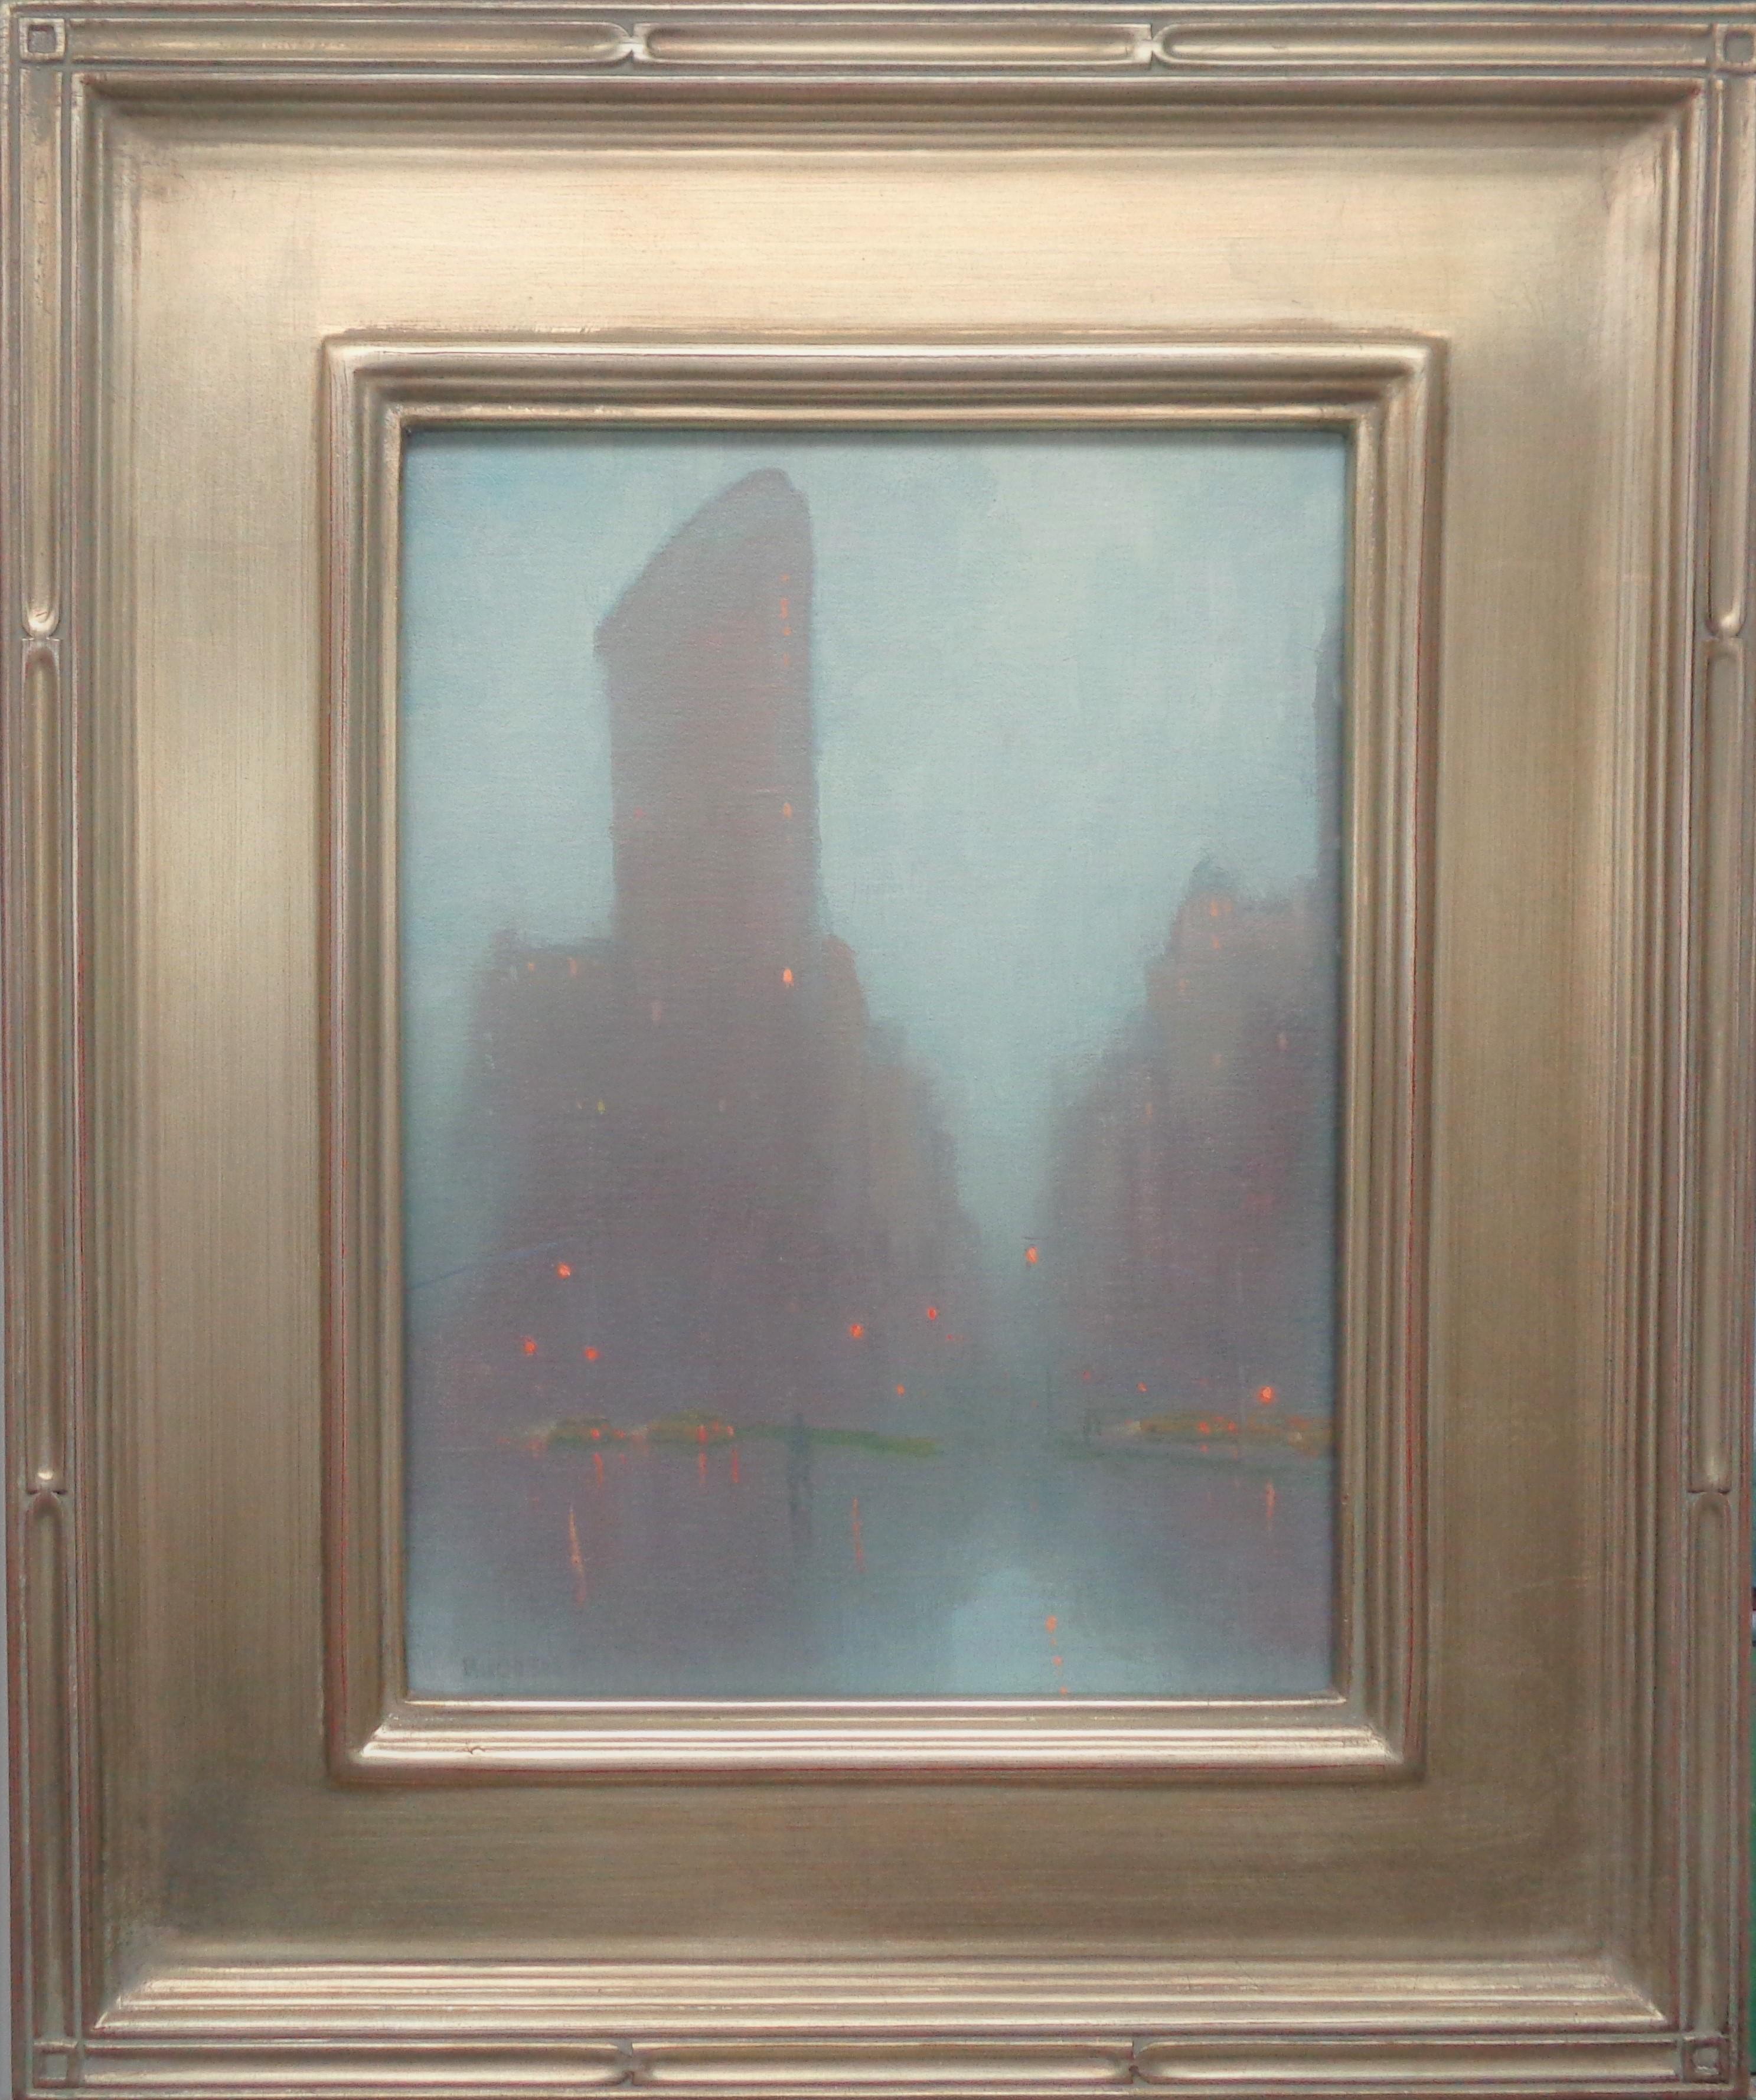 Rainy Day Fog, Flatiron Building
oil/panel  12 x 9 unframed, 18.5 x 15.5 framed

Rainy Day Fog, Flatiron is an oil painting on canvas by award winning contemporary artist Michael Budden that showcases a beautiful moody impressionistic oil painting